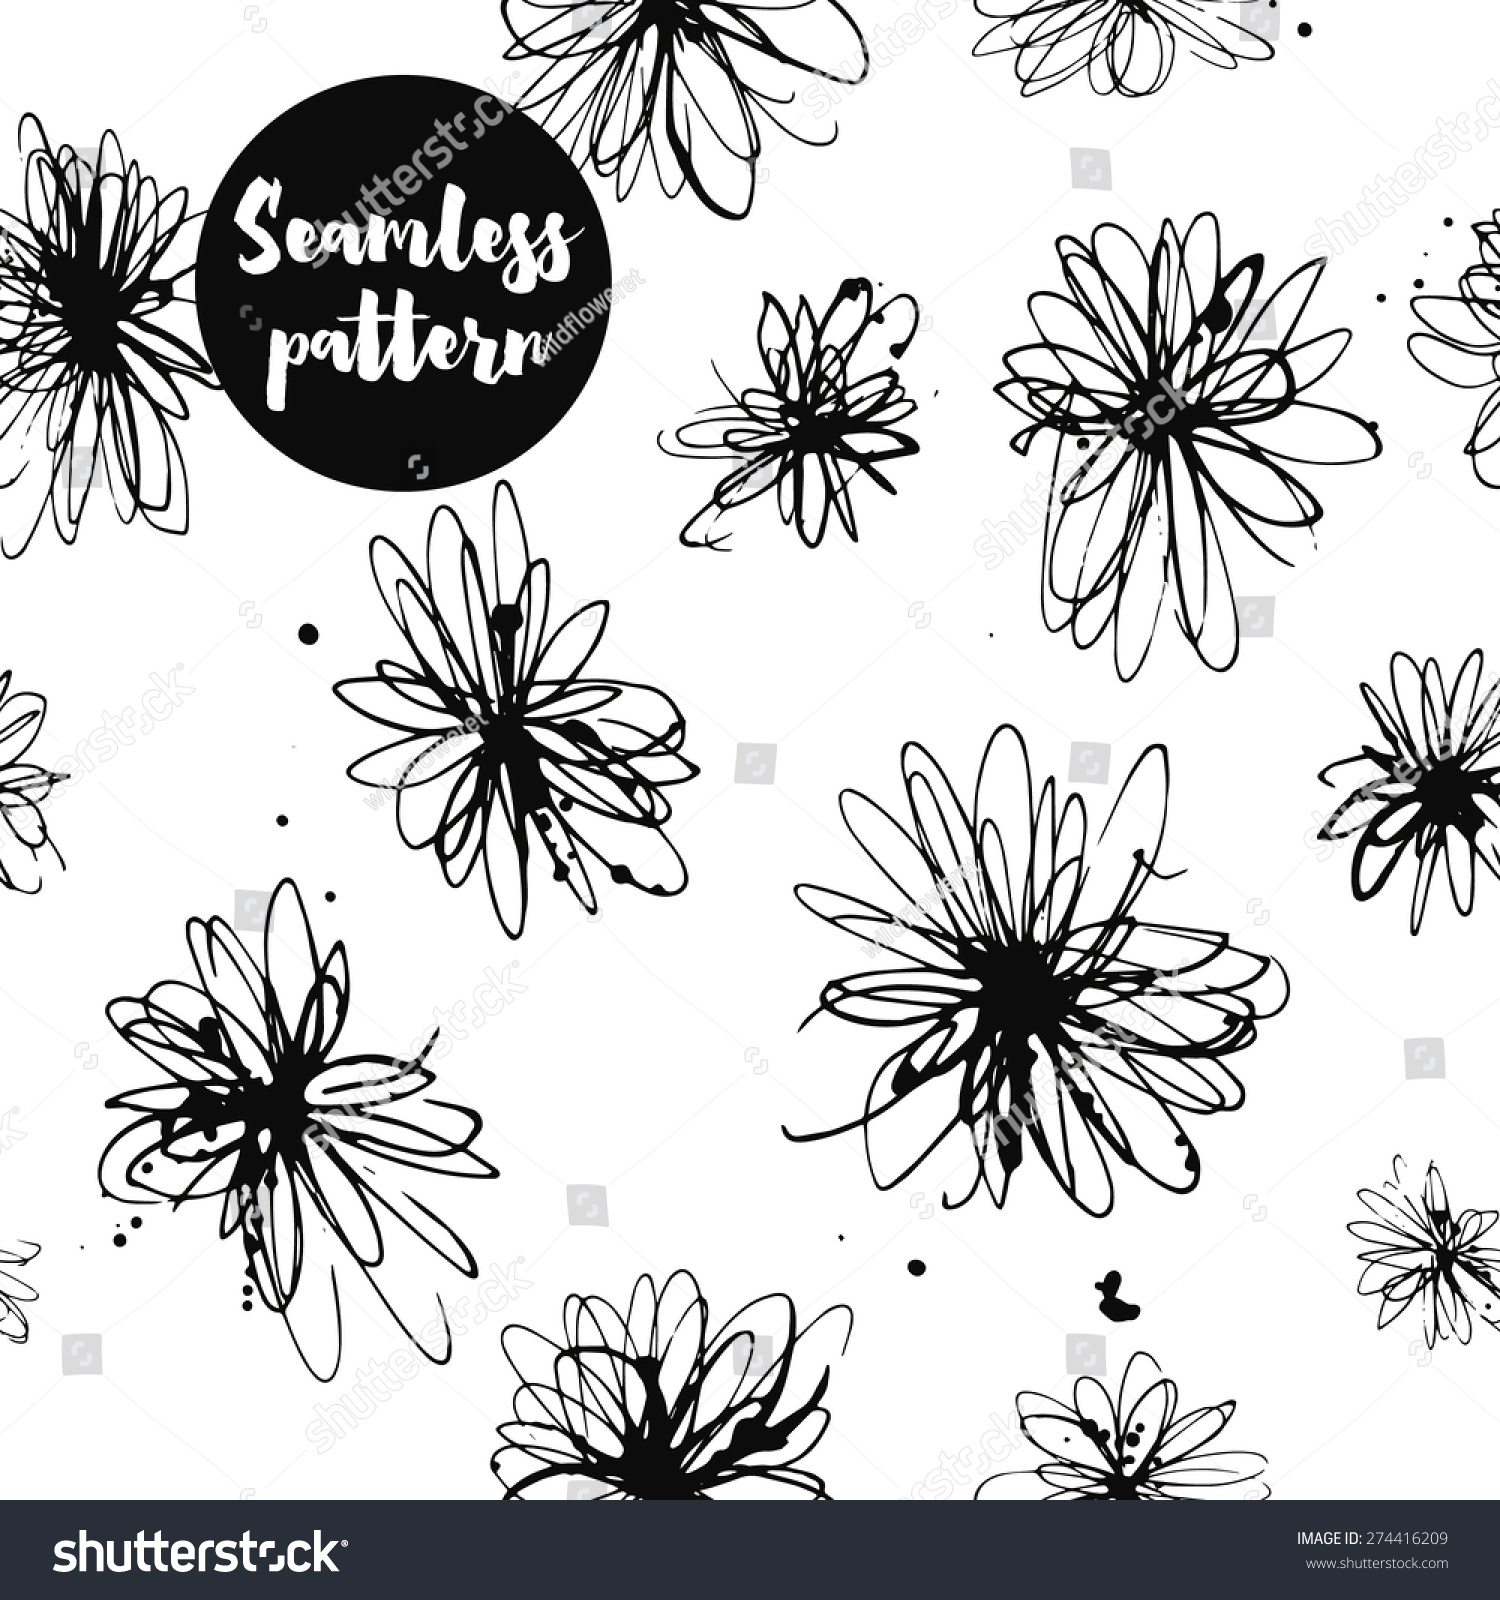 The seamless pattern with hand drawn ink flowers and splashes for your design. Black and white artistic background. #274416209